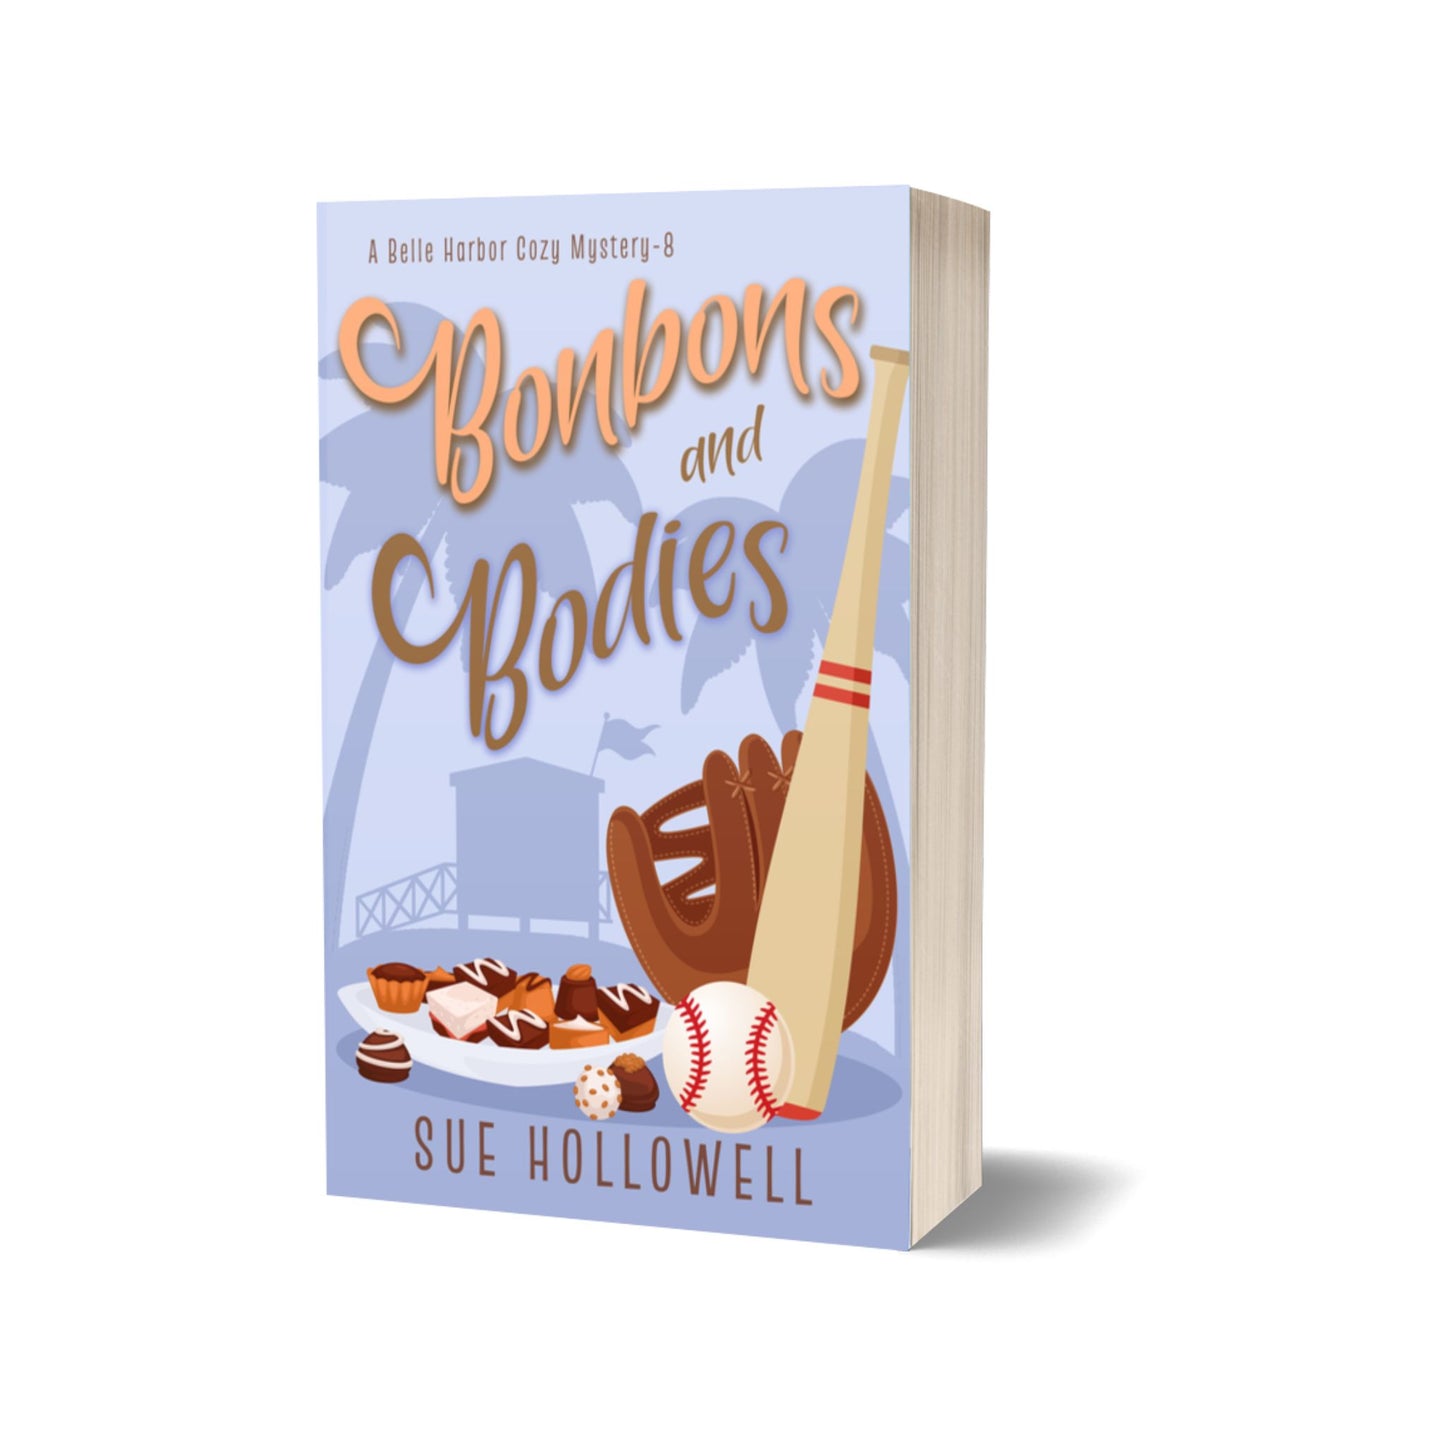 Bonbons and Bodies culinary cozy mystery